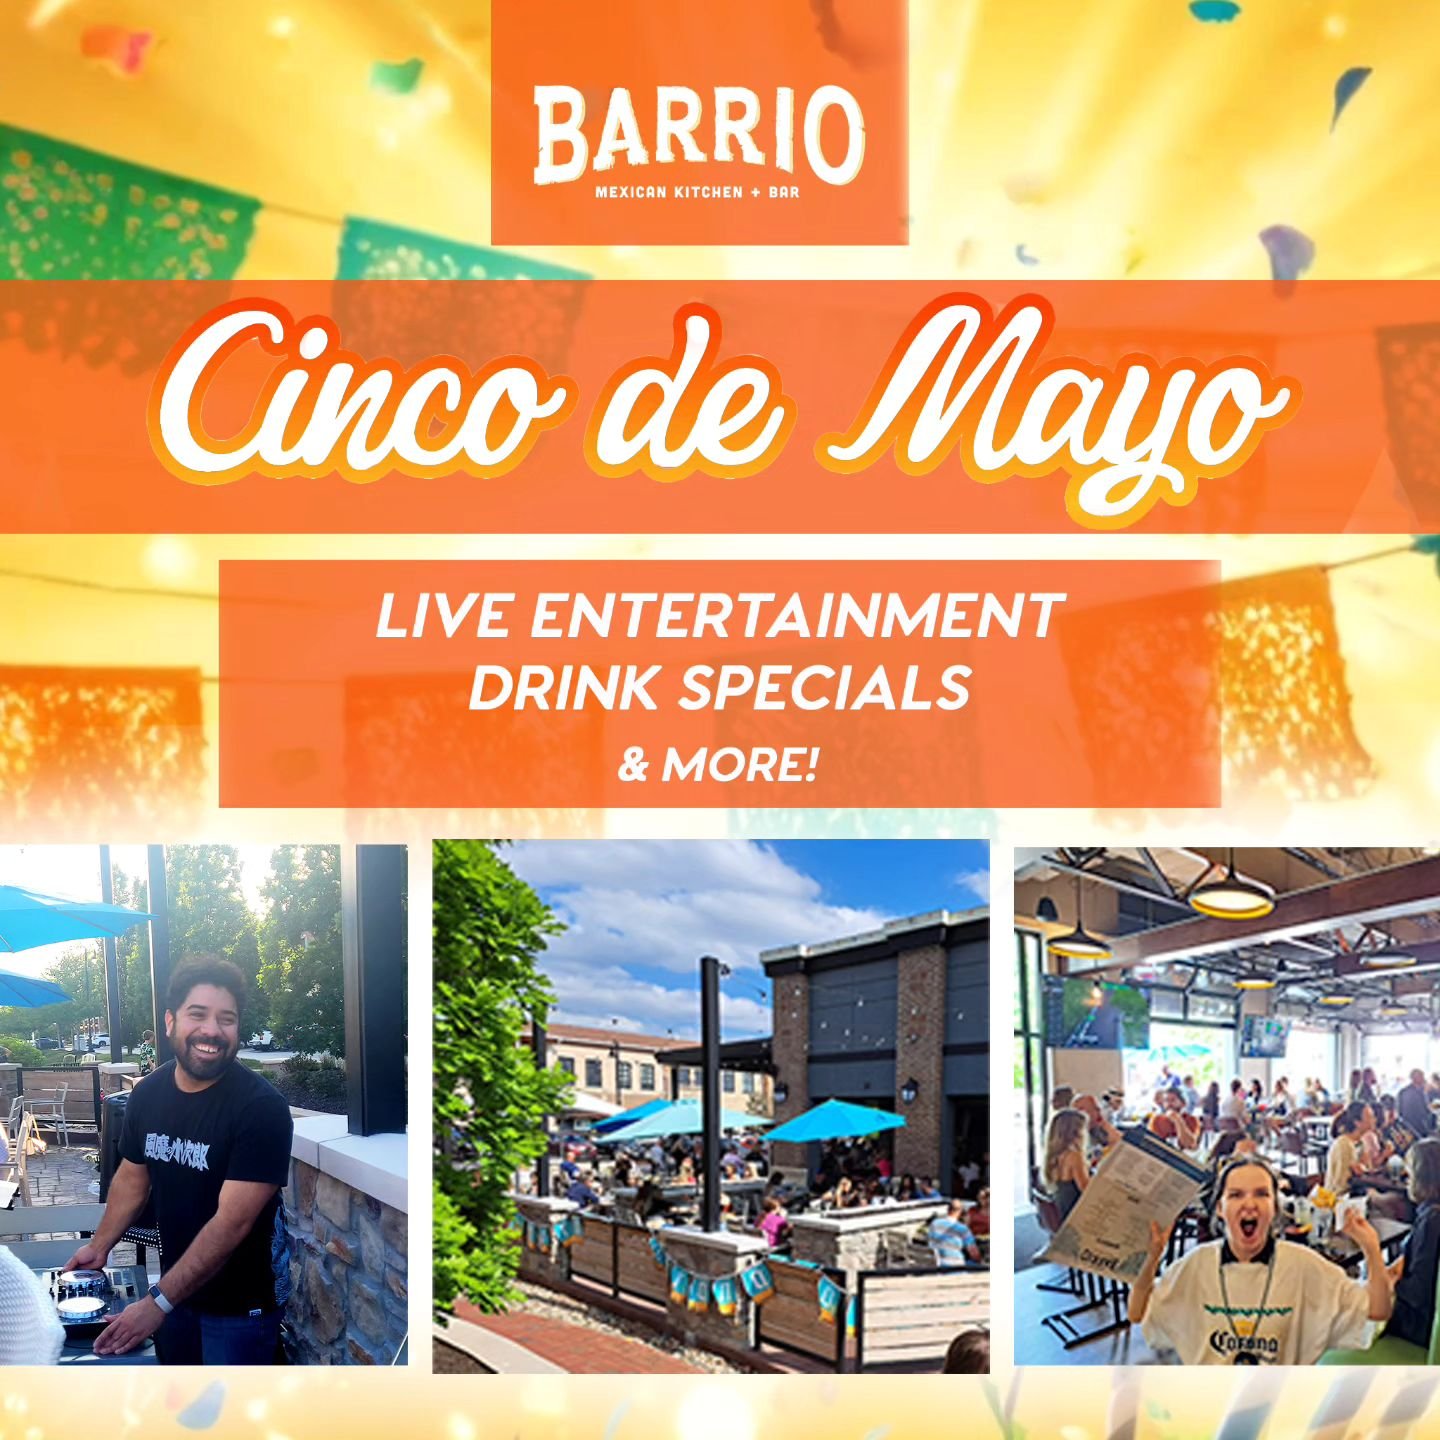 Mark your calendars for the fiesta of the year! Cinco de Mayo is just around the corner: Sunday, May 5th. Get ready for tasty drink specials, live music at all locations and more!&nbsp; 💃🥳🍹

Who knows, maybe we'll get the party started early on Sa